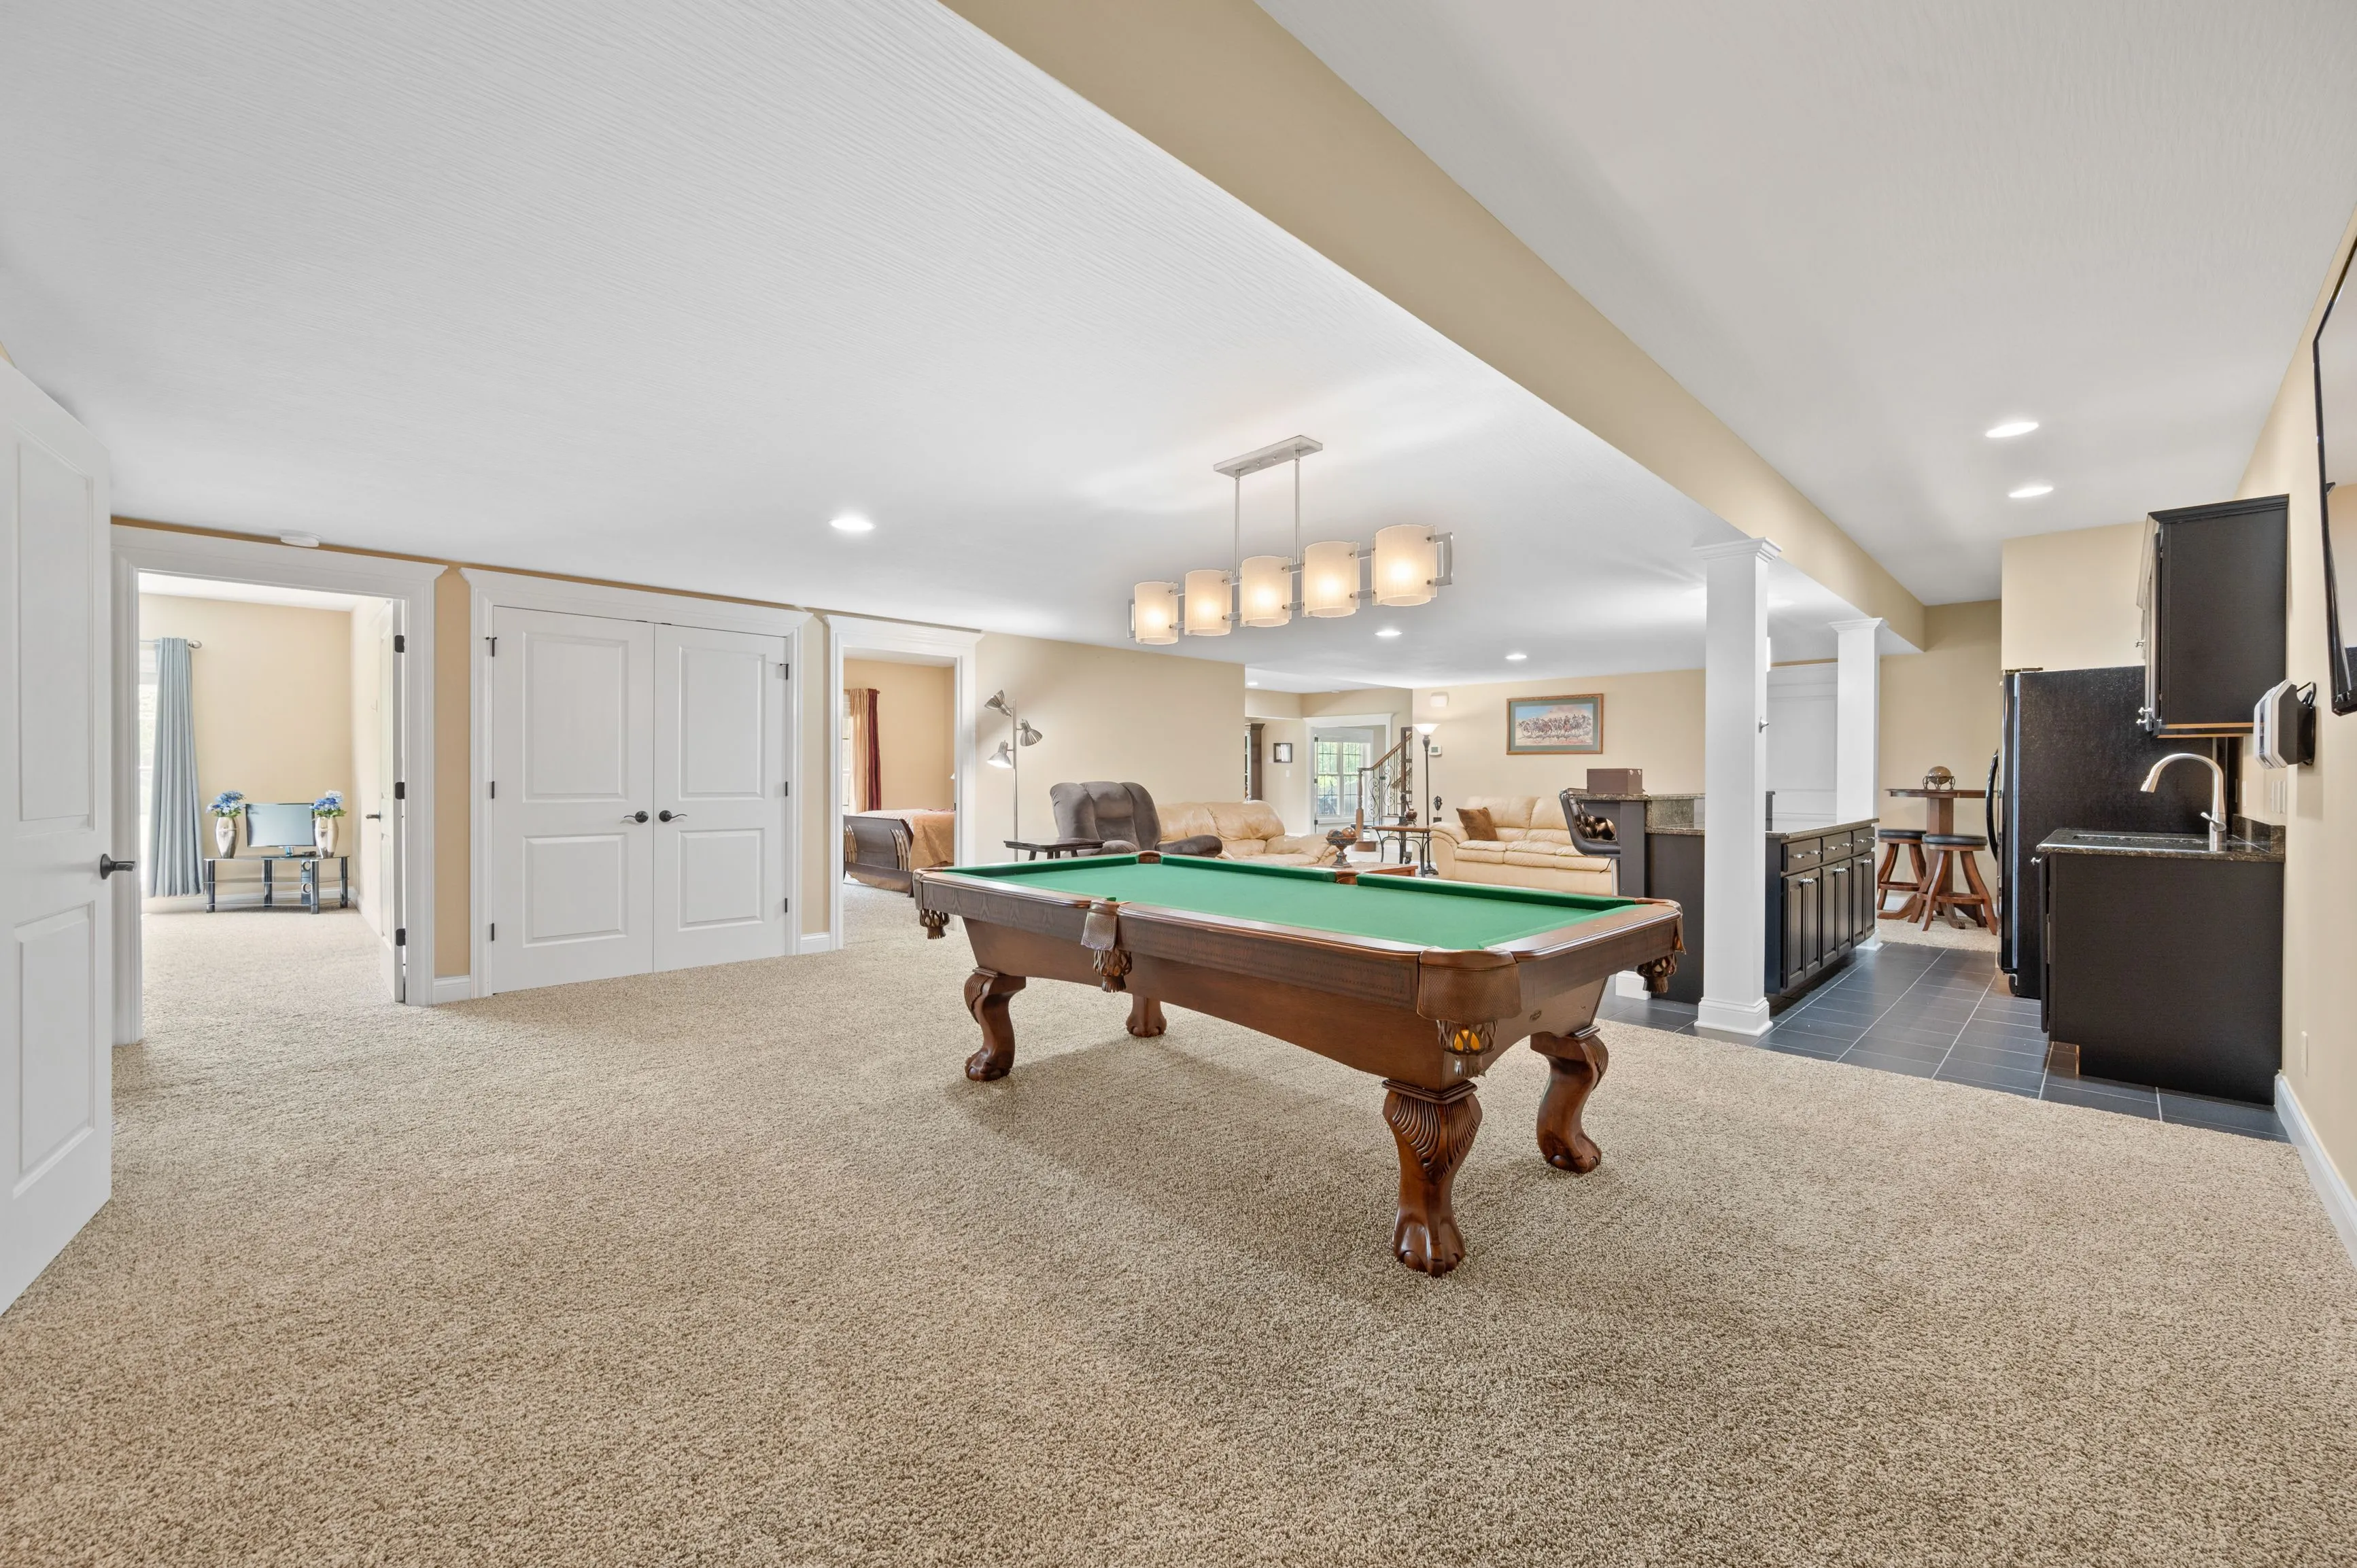 Spacious basement recreation room with a pool table, beige carpet, white ceiling, and beige walls, including a seating area and a minibar.